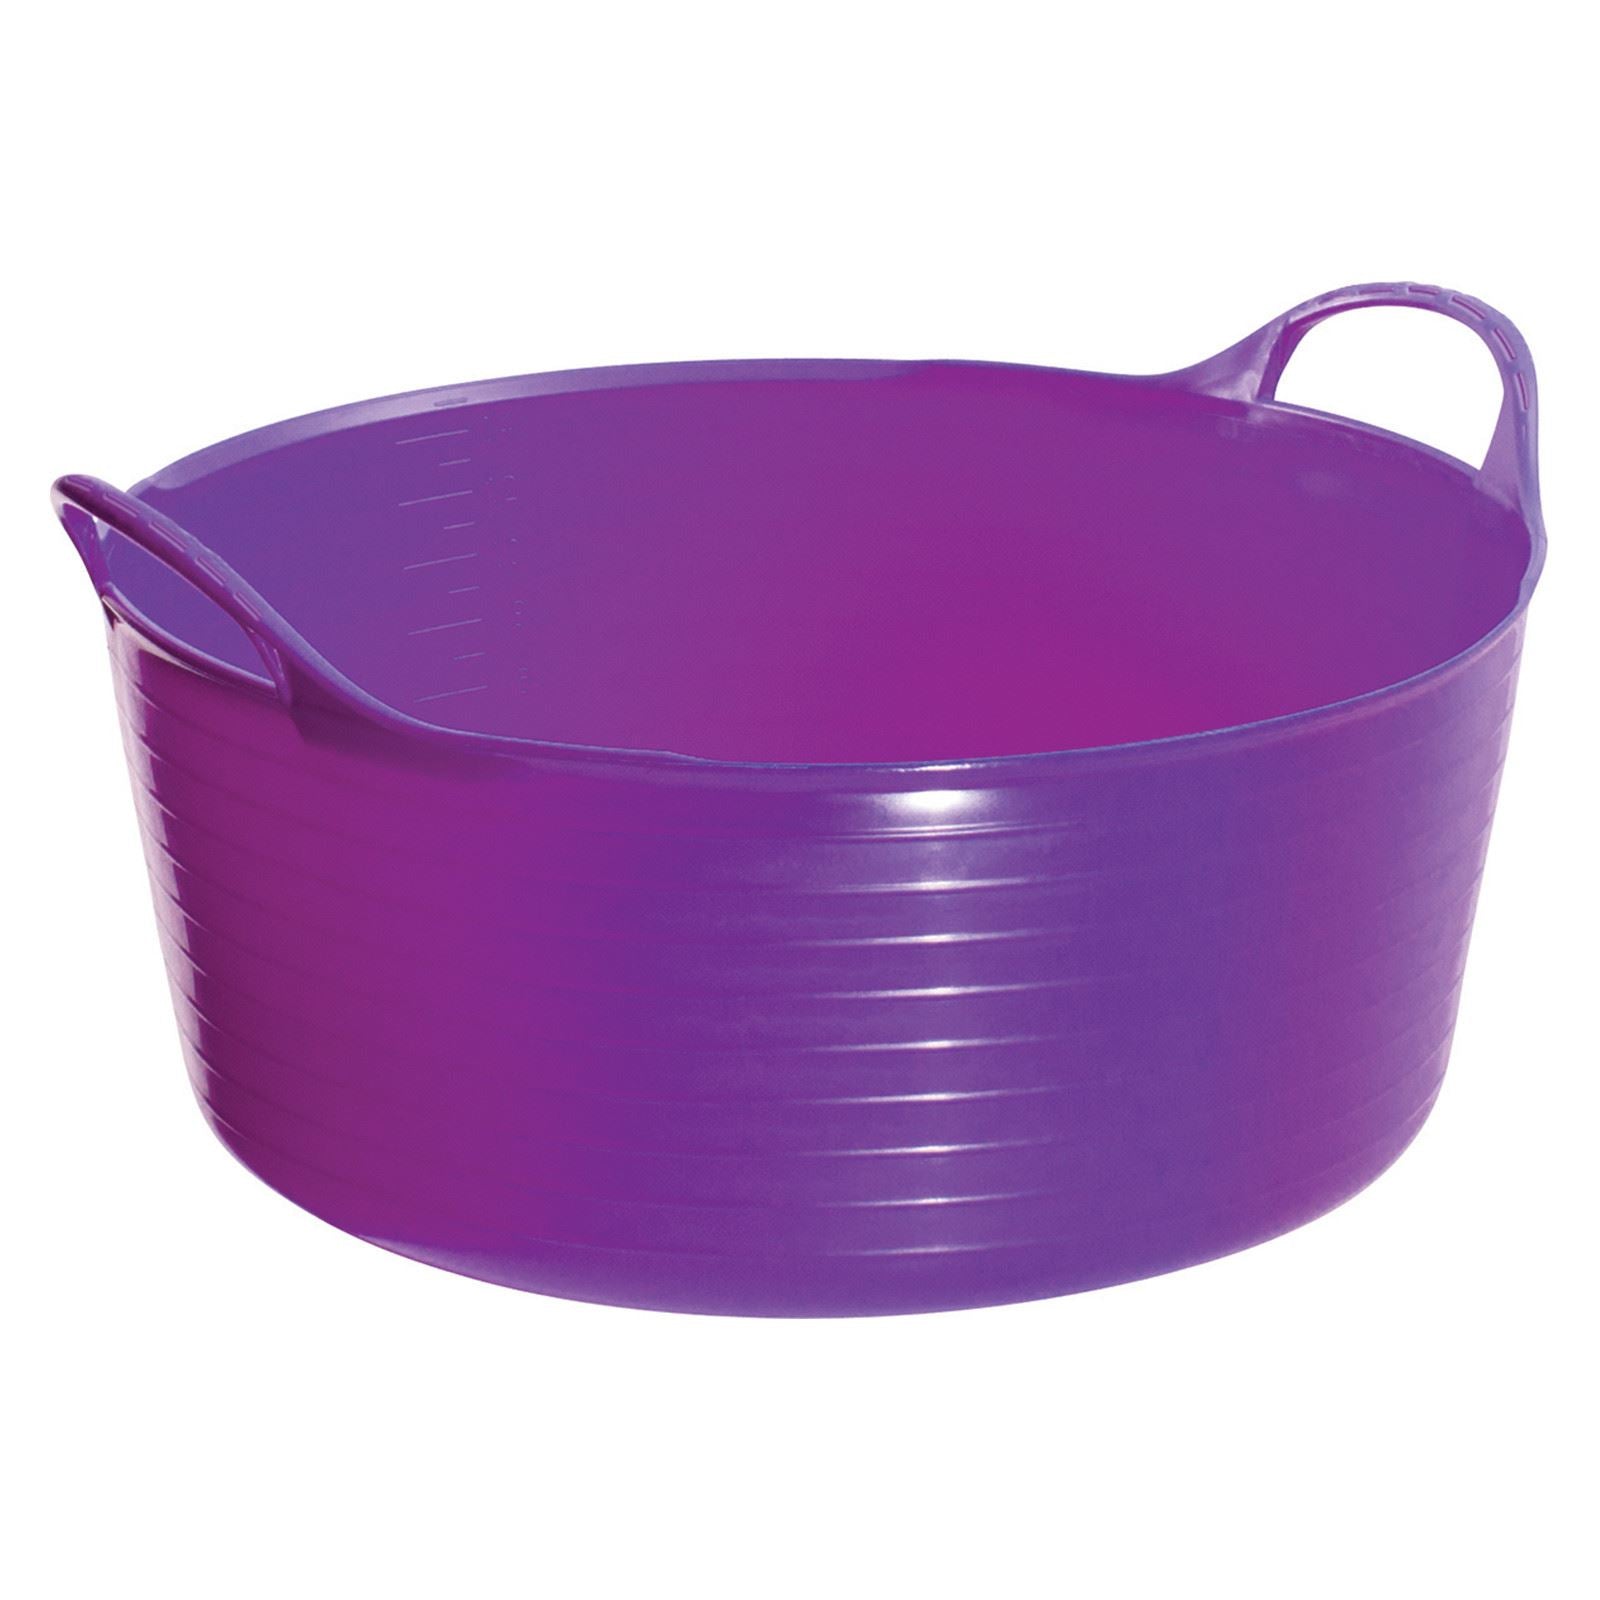 Perry Equestrian 15 Litre (4 Gallon) Flexi-Fill Shallow Flexible Tubs/Trugs - Just Horse Riders